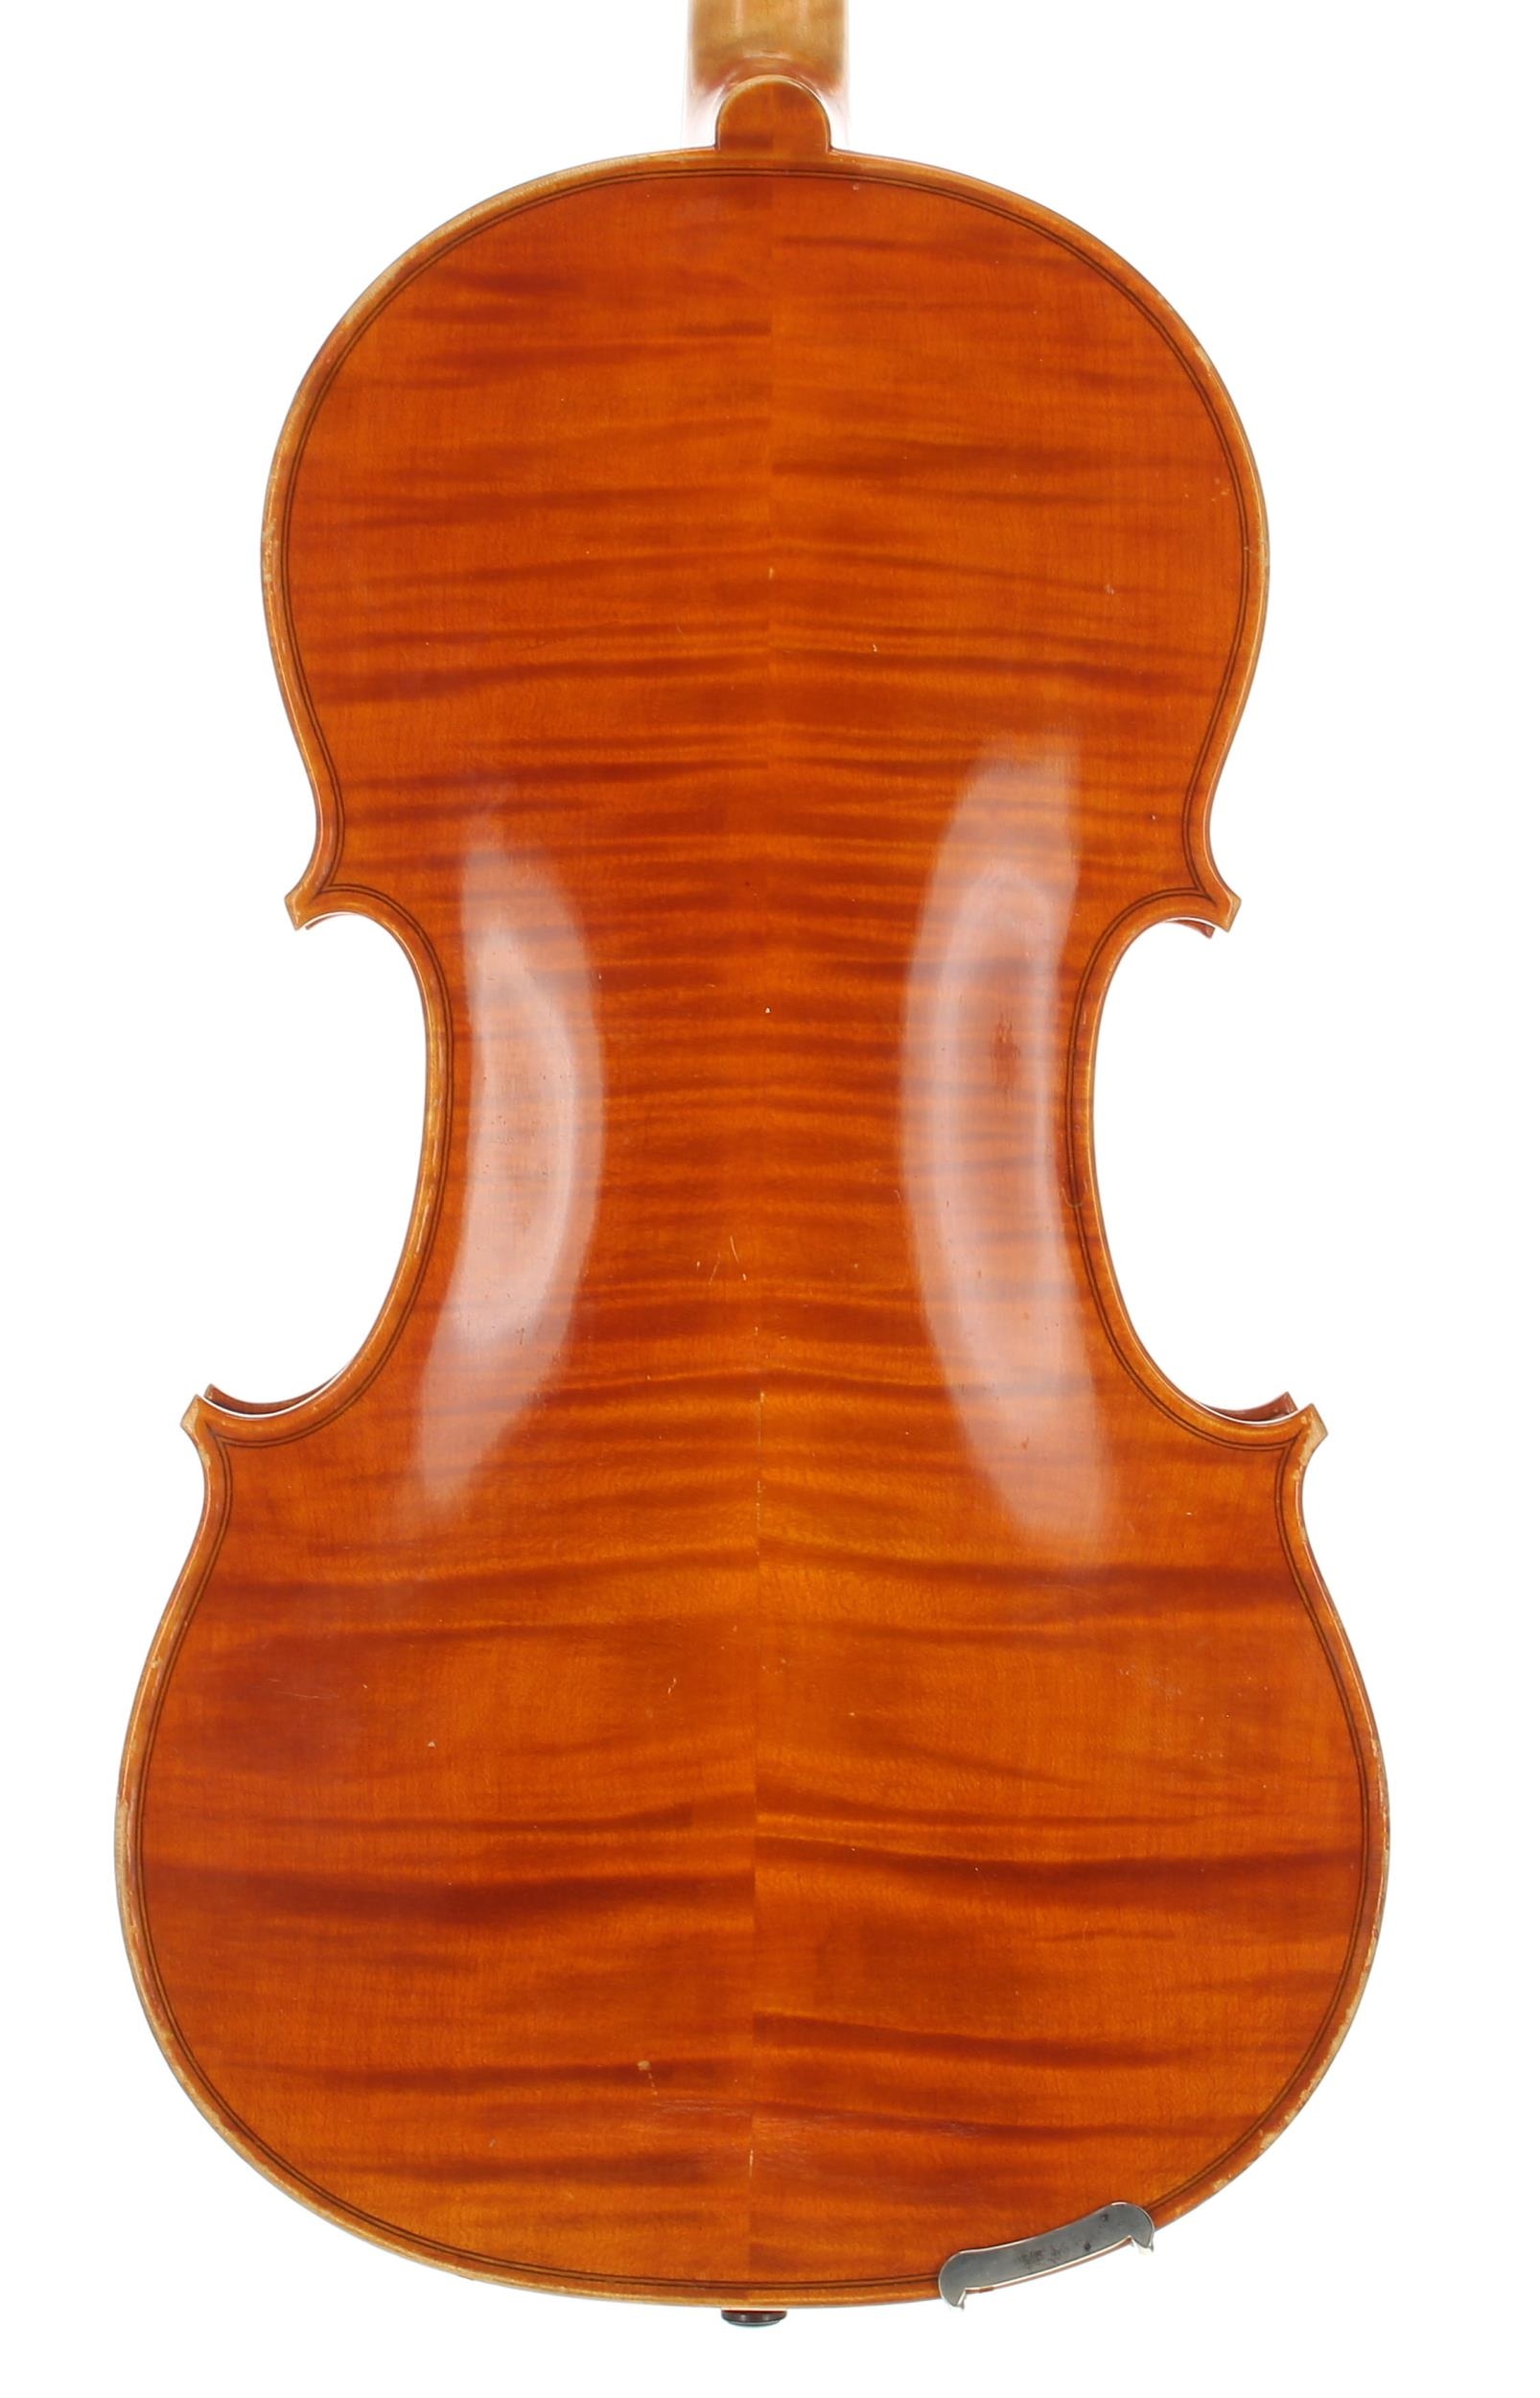 Good contemporary English viola by and labelled Rowan Armour-Brown, Made in Cornwall, 1976, the - Image 2 of 3